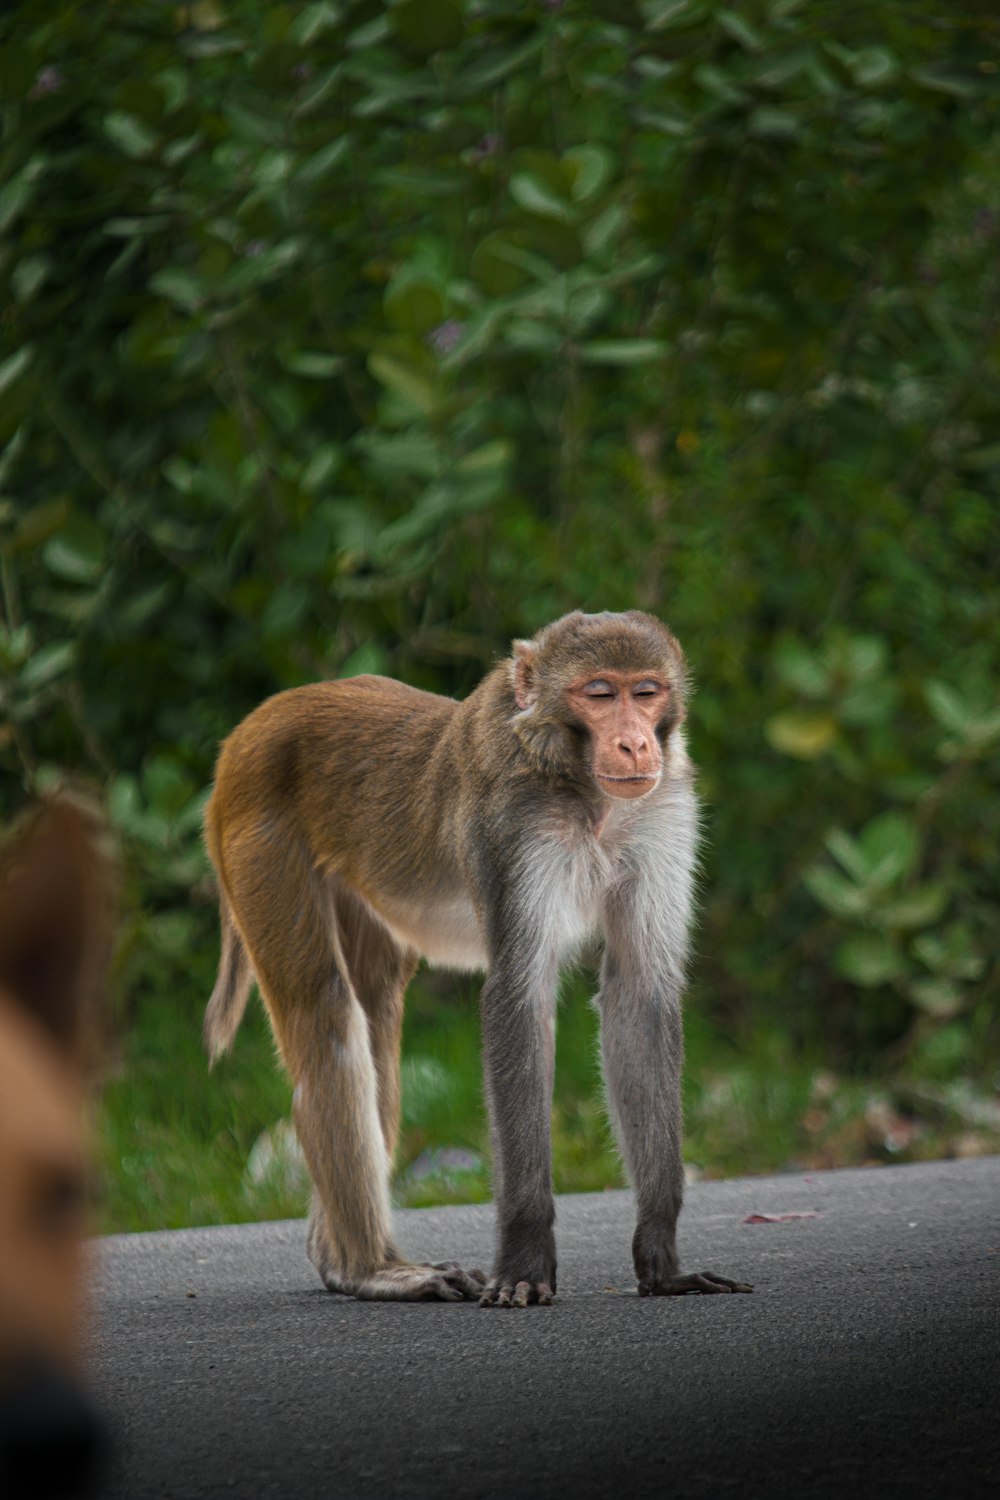 a monkey standing on the side of a road